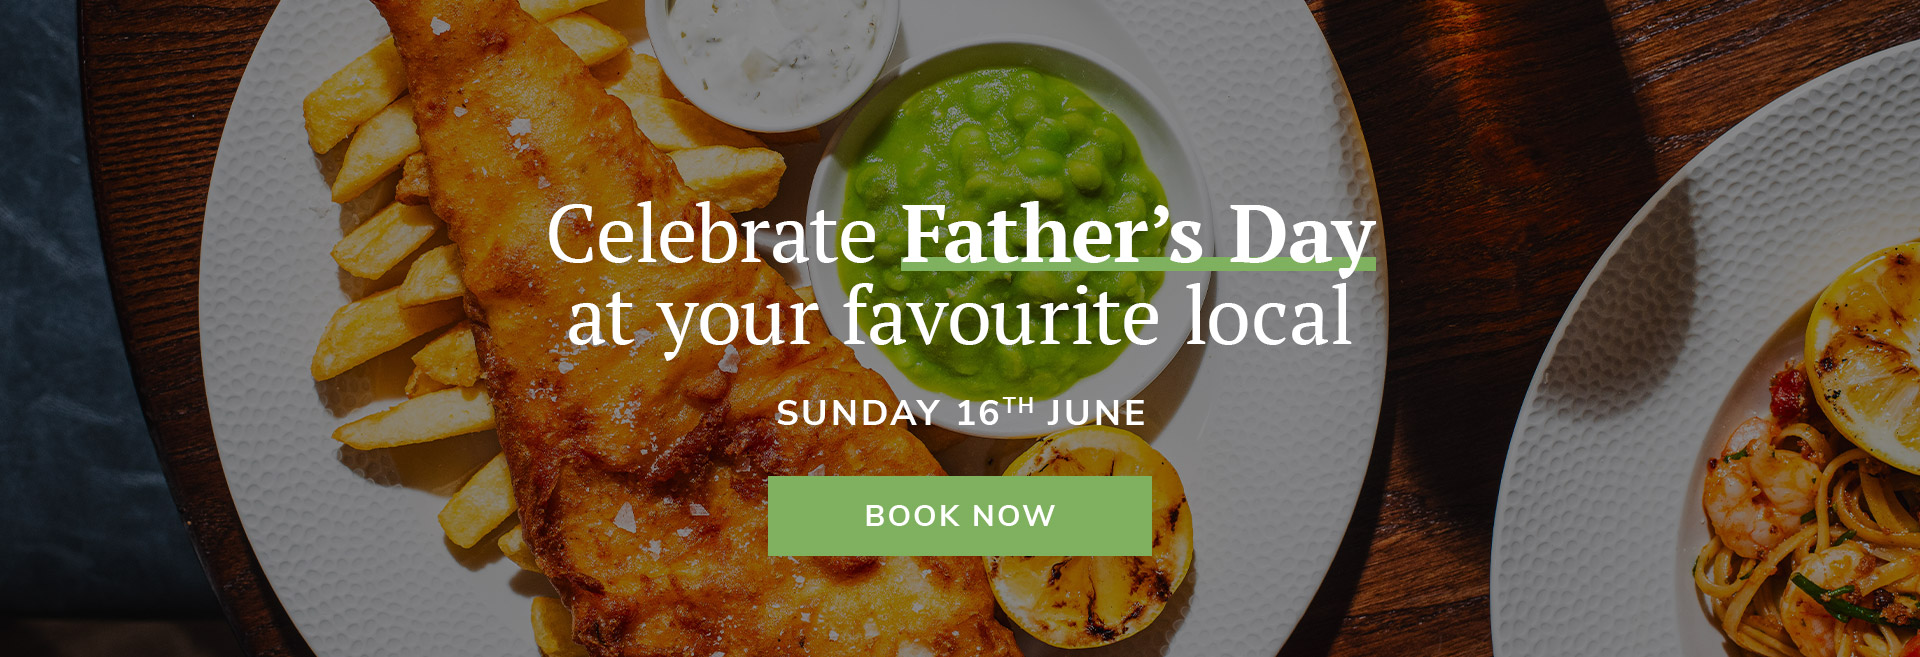 Father's Day at The Rose and Thistle